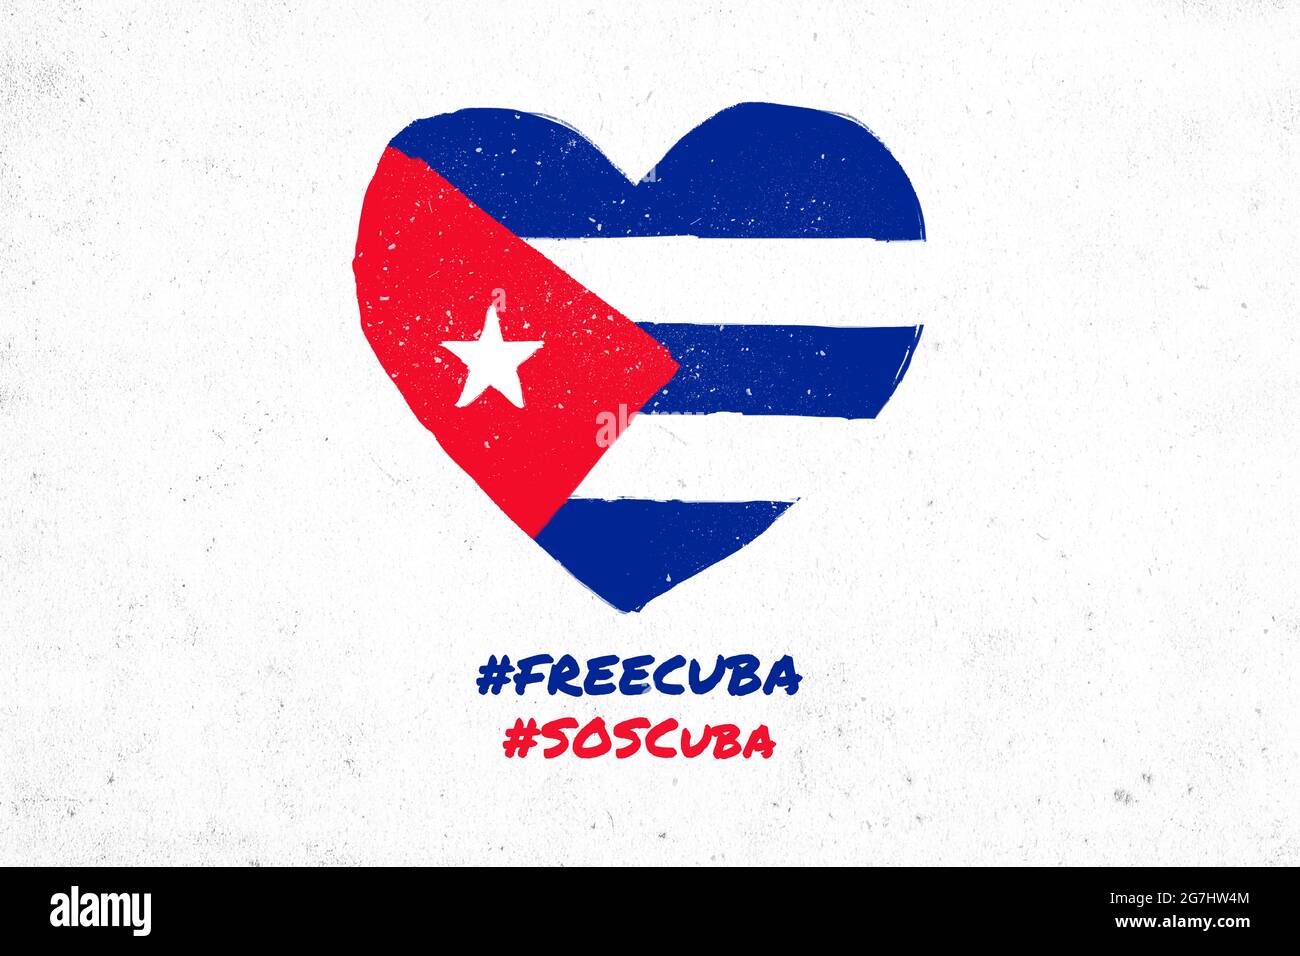 Free Cuba, SOS Cuba, drawn heart on a textured surface with the Cuban flag. Protests in Cuba against the government fighting for freedom and democracy Stock Photo